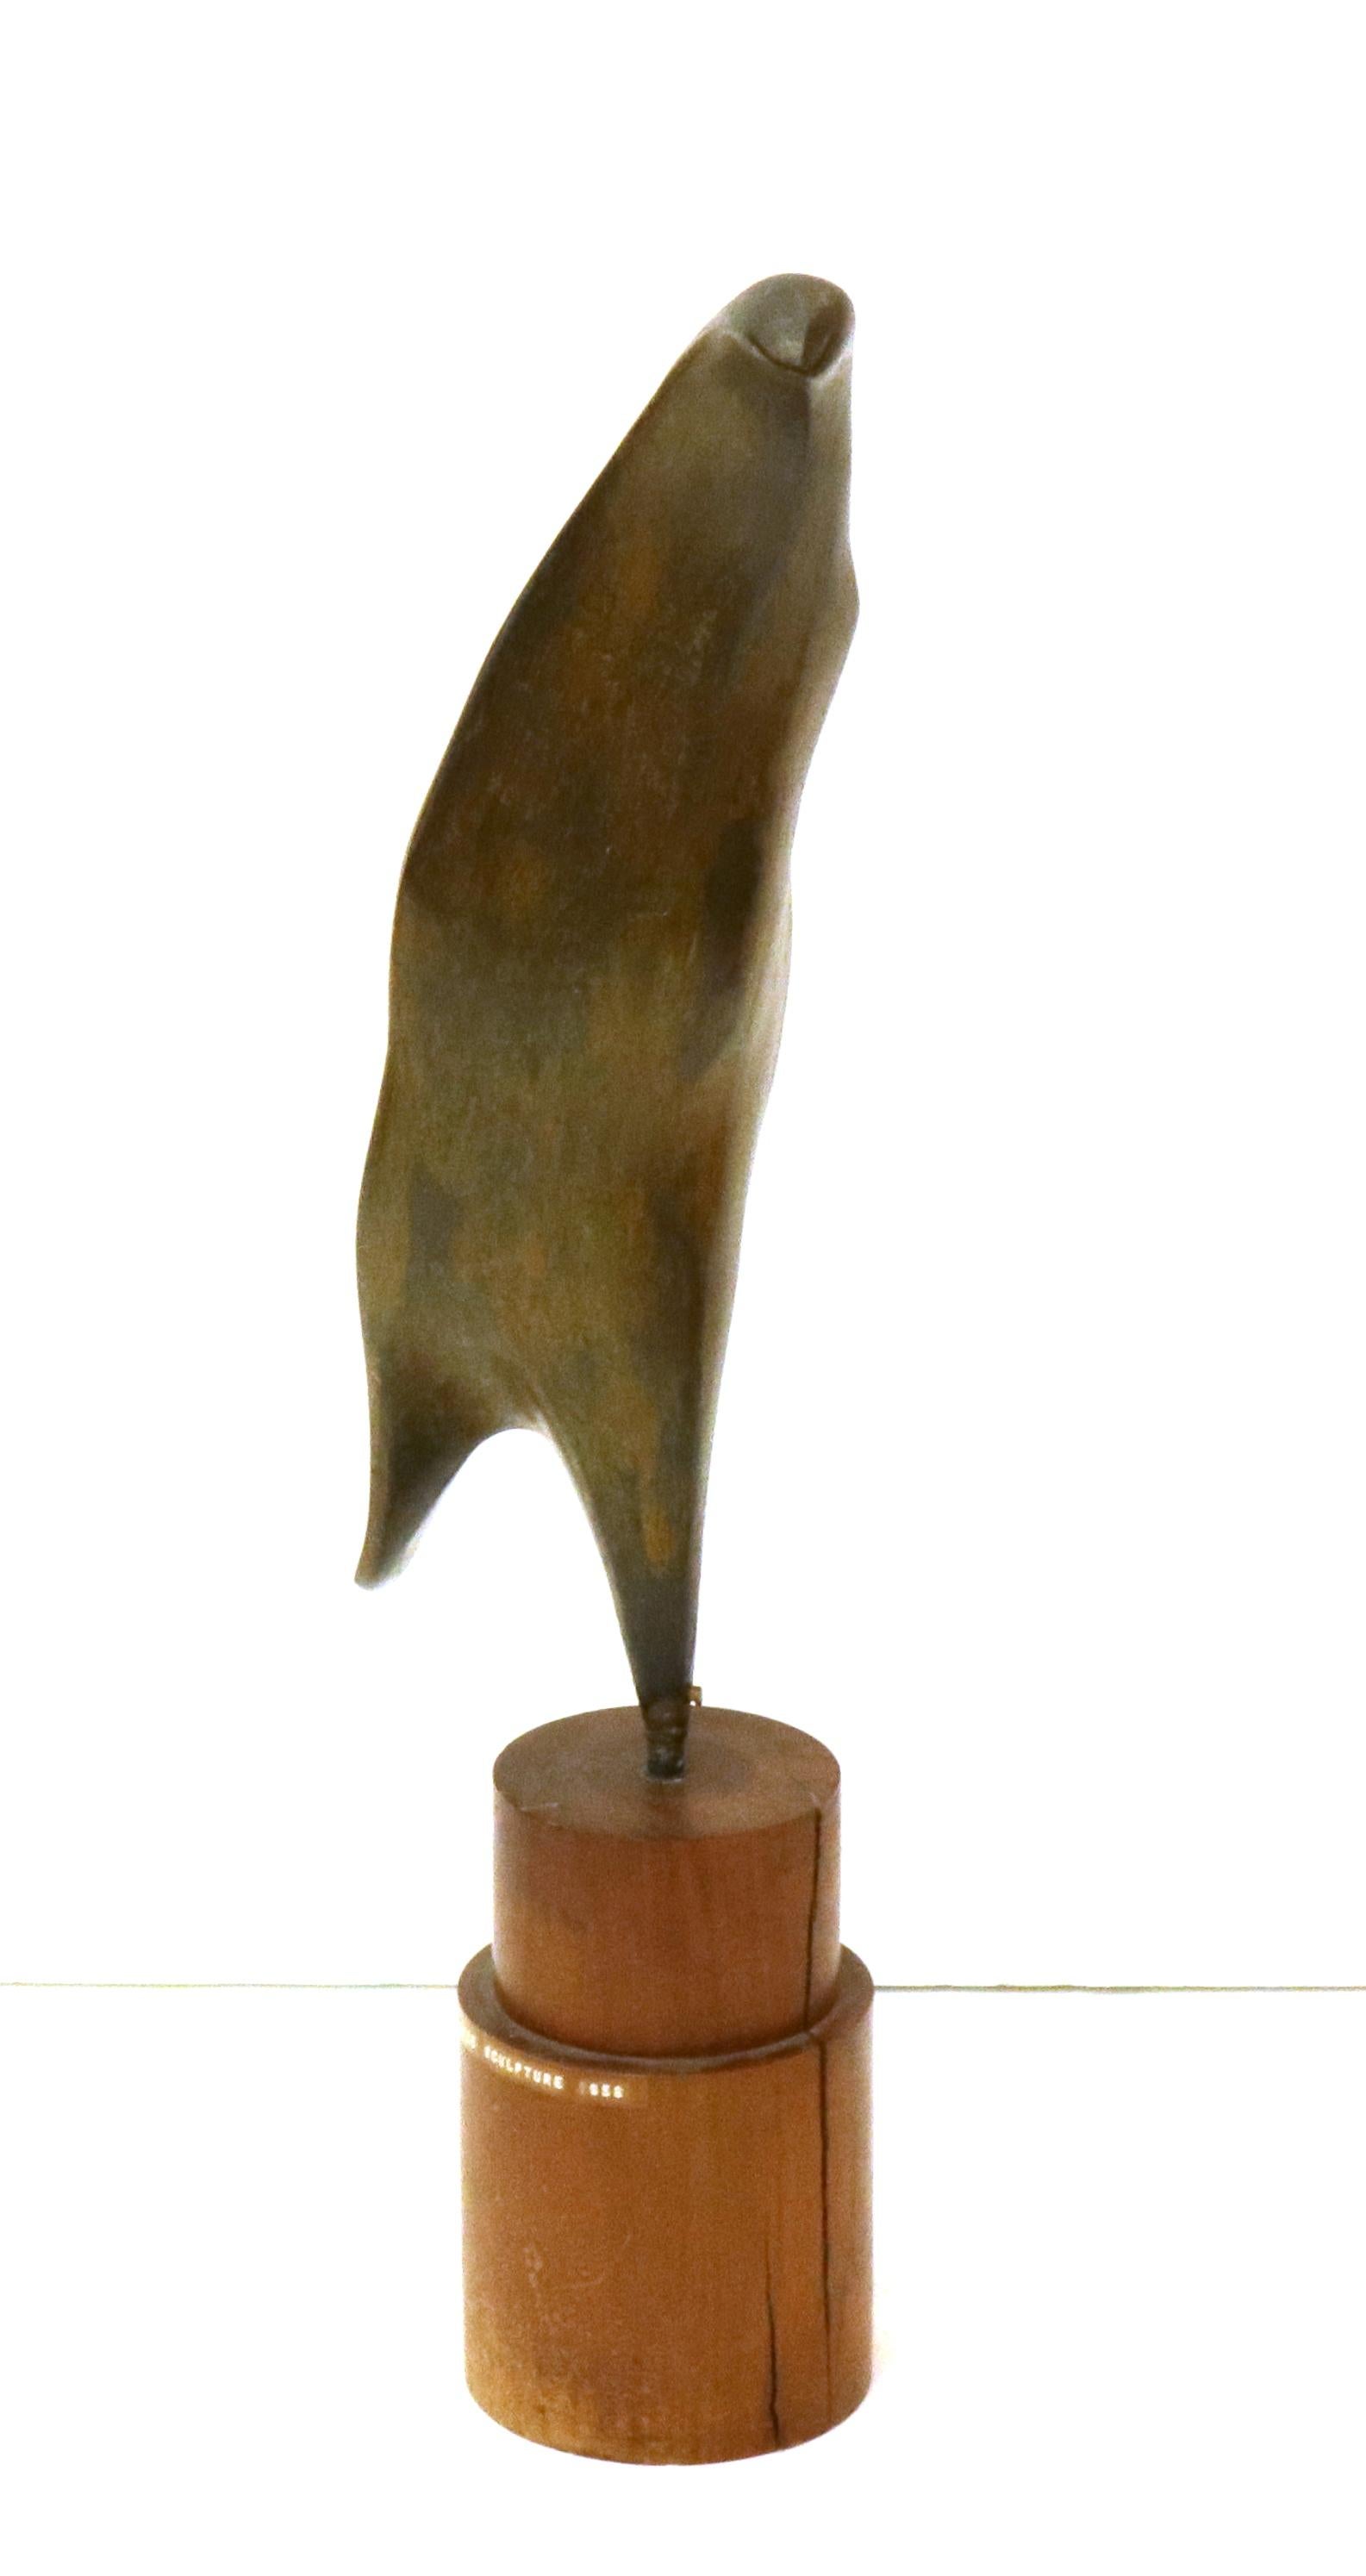 Italian Mid-Century Modern abstract bronze sculpture depicting a penguin, made by Chio (b. 1917) in 1958. The green patina bronze is mounted on a cylindrical wooden base with label informing on artist name, title and date (1958). 
The piece is in